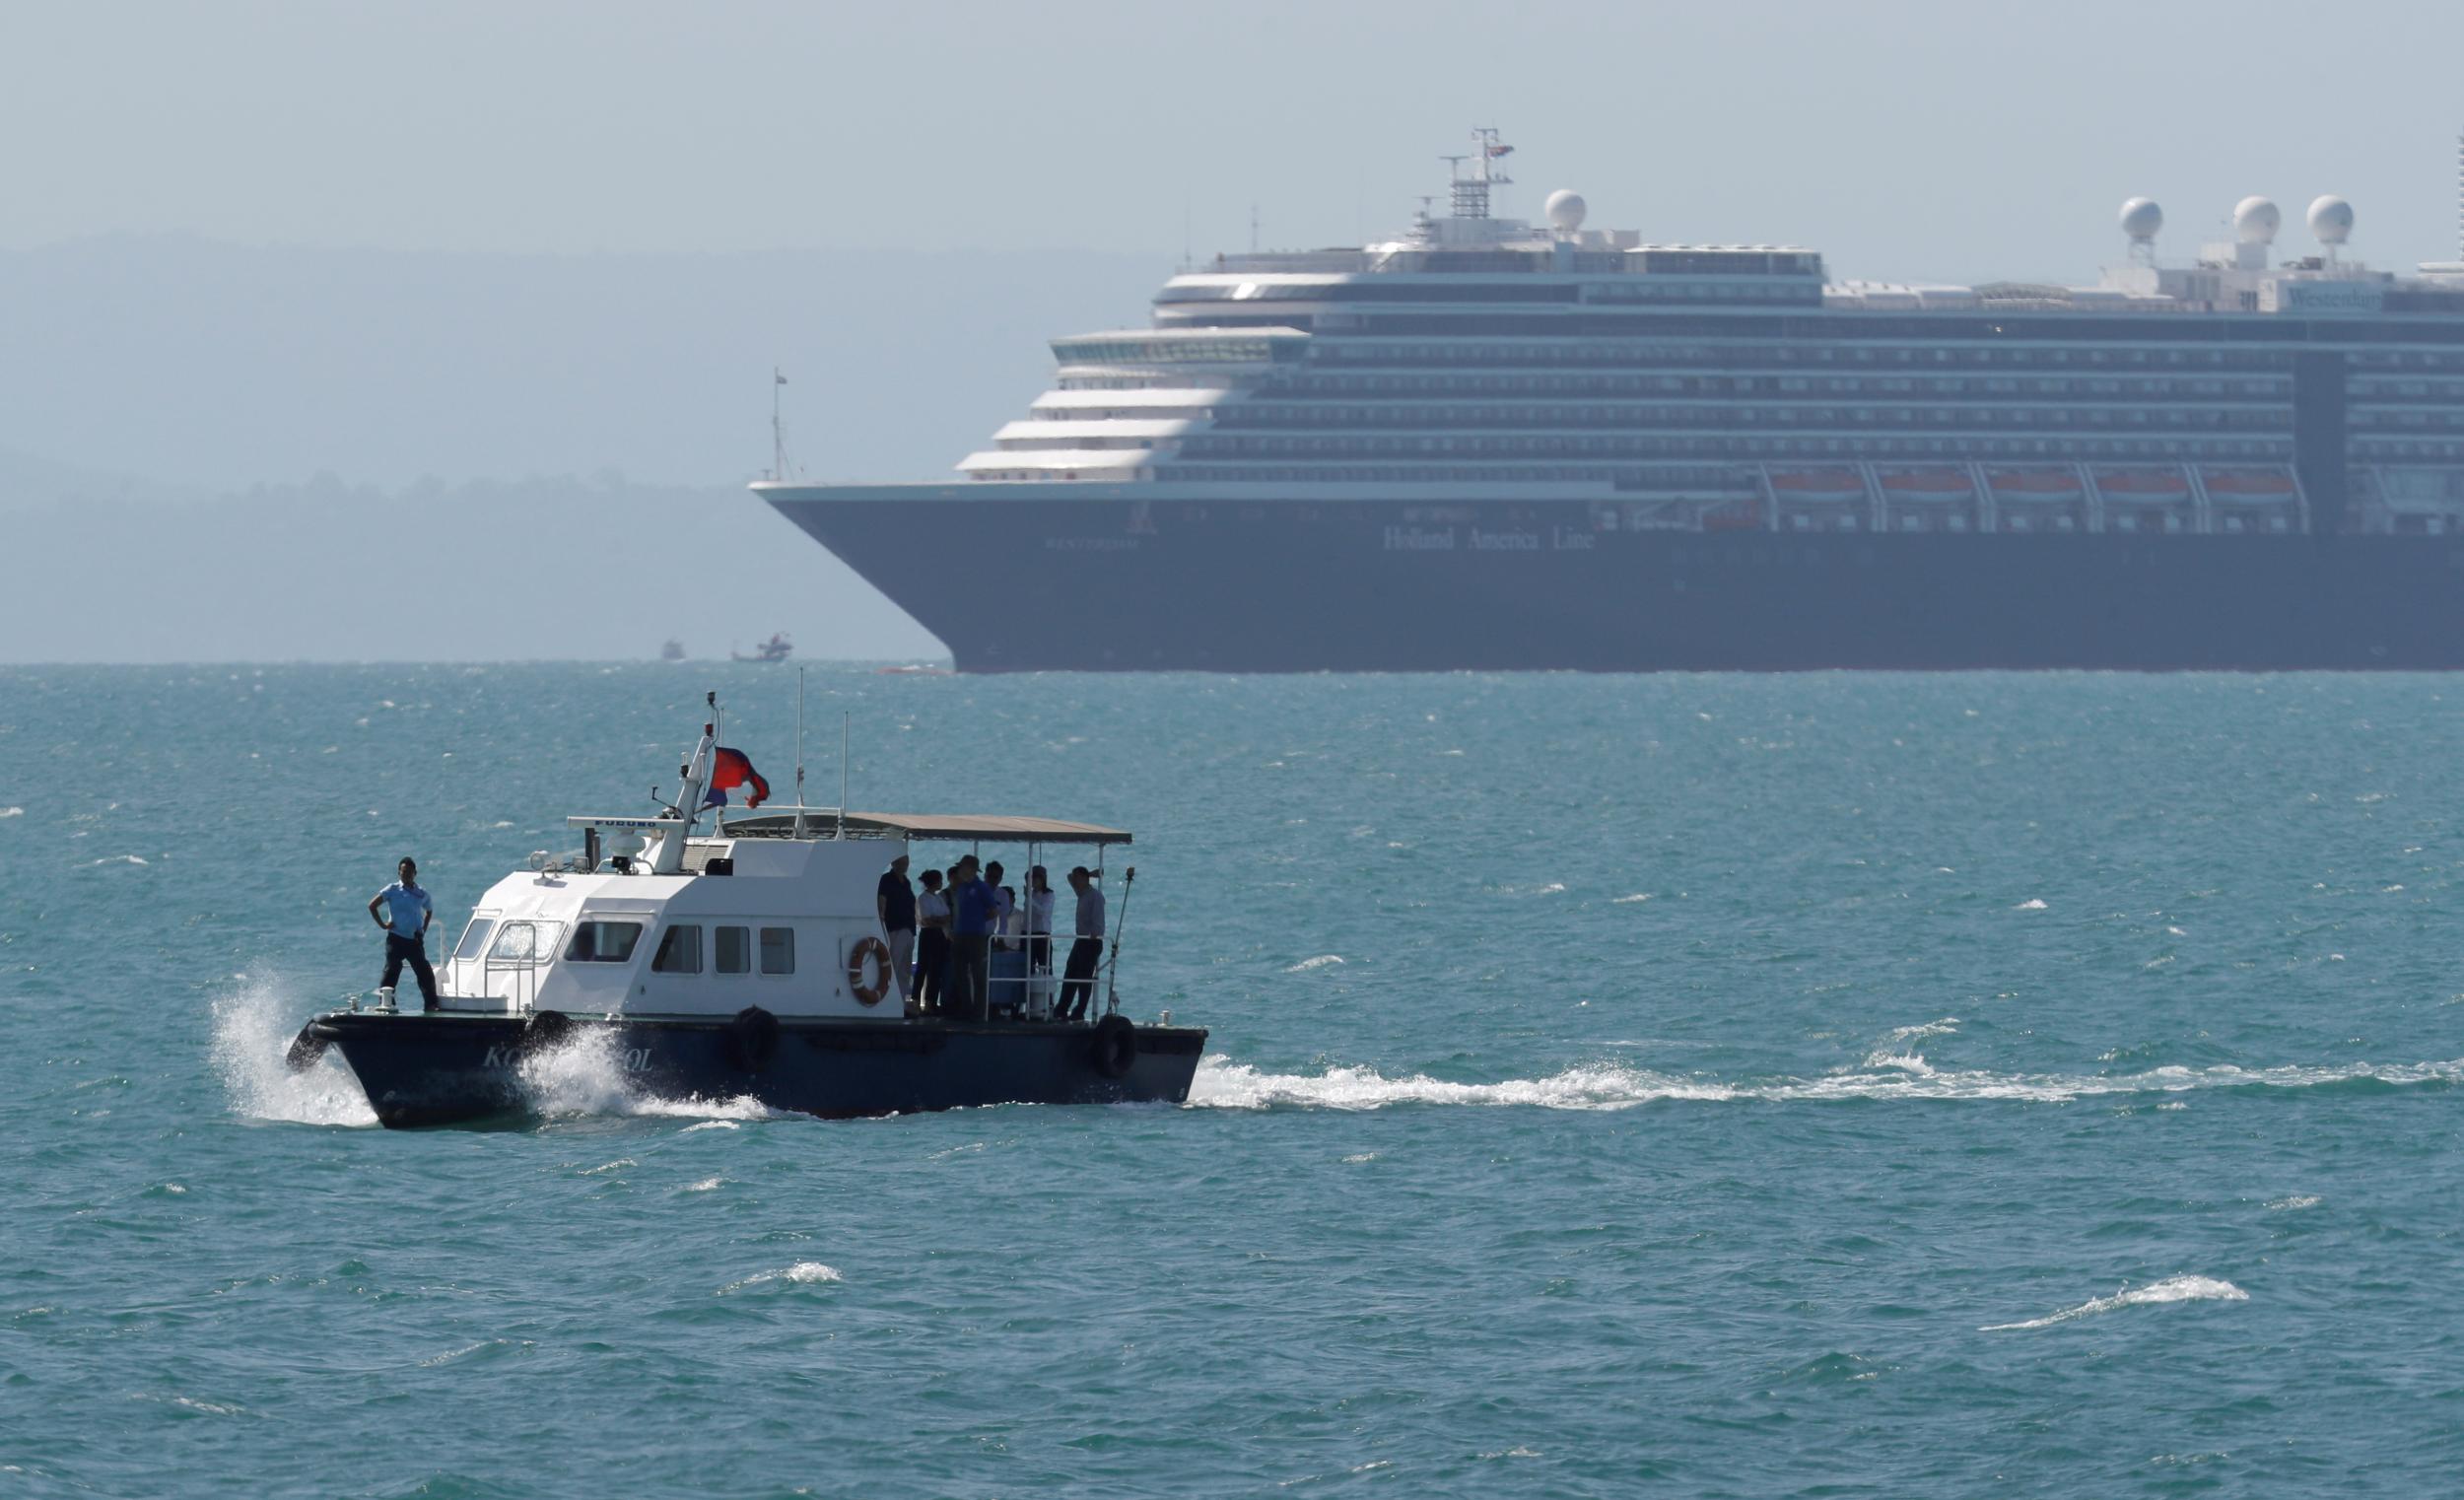 Holland America Line's Westerdam ship finally docks in Cambodia after two weeks at sea